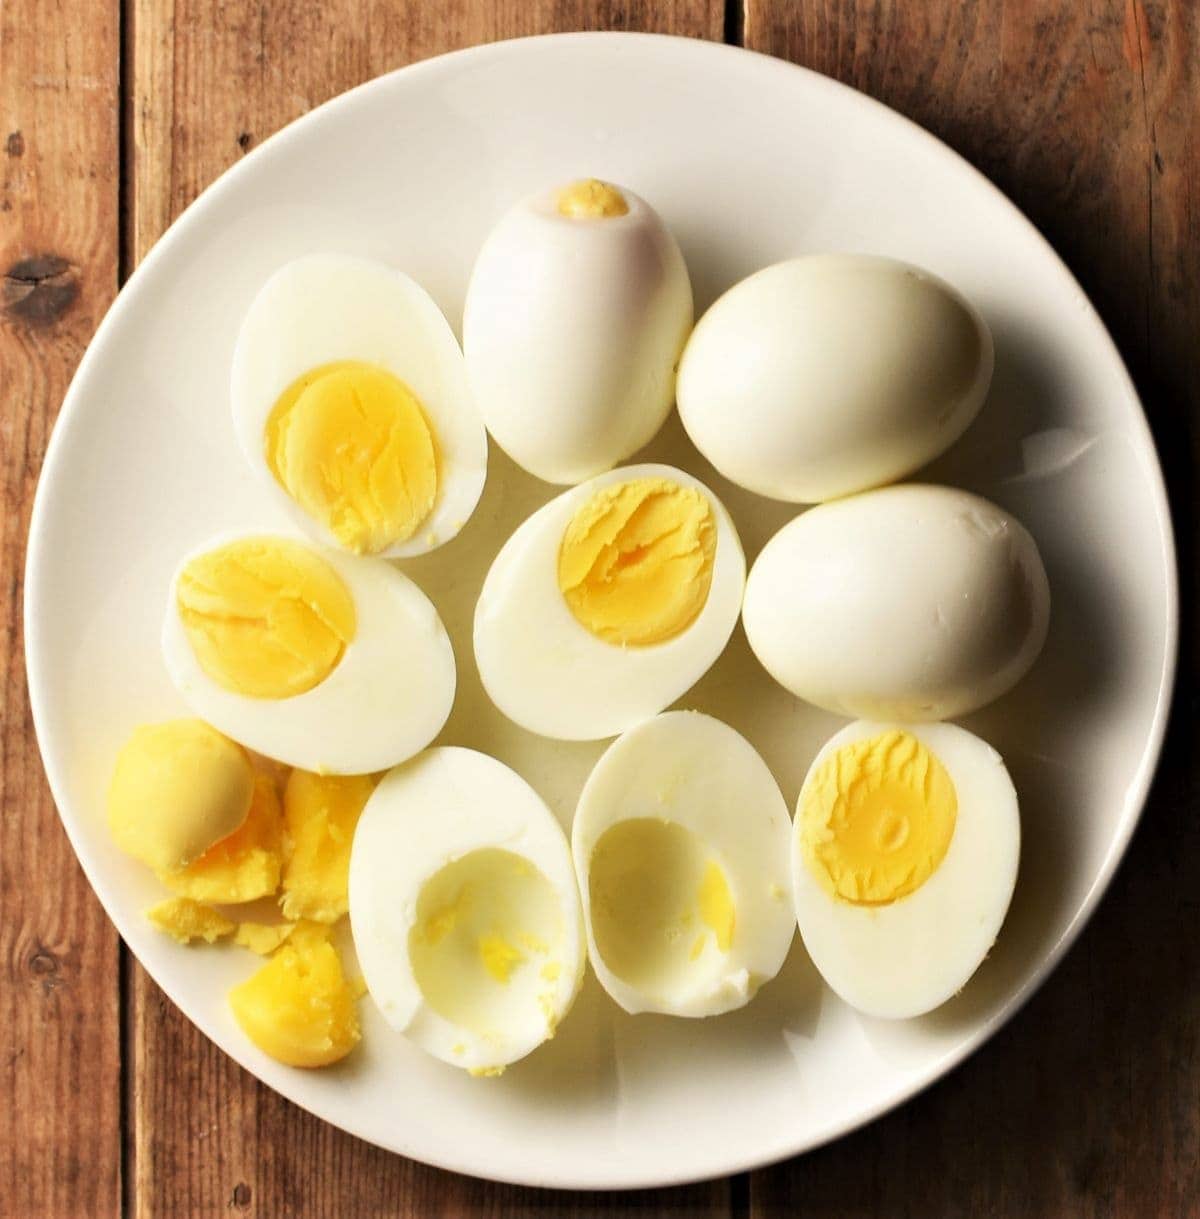 Halved hard boiled eggs on top of white plate.